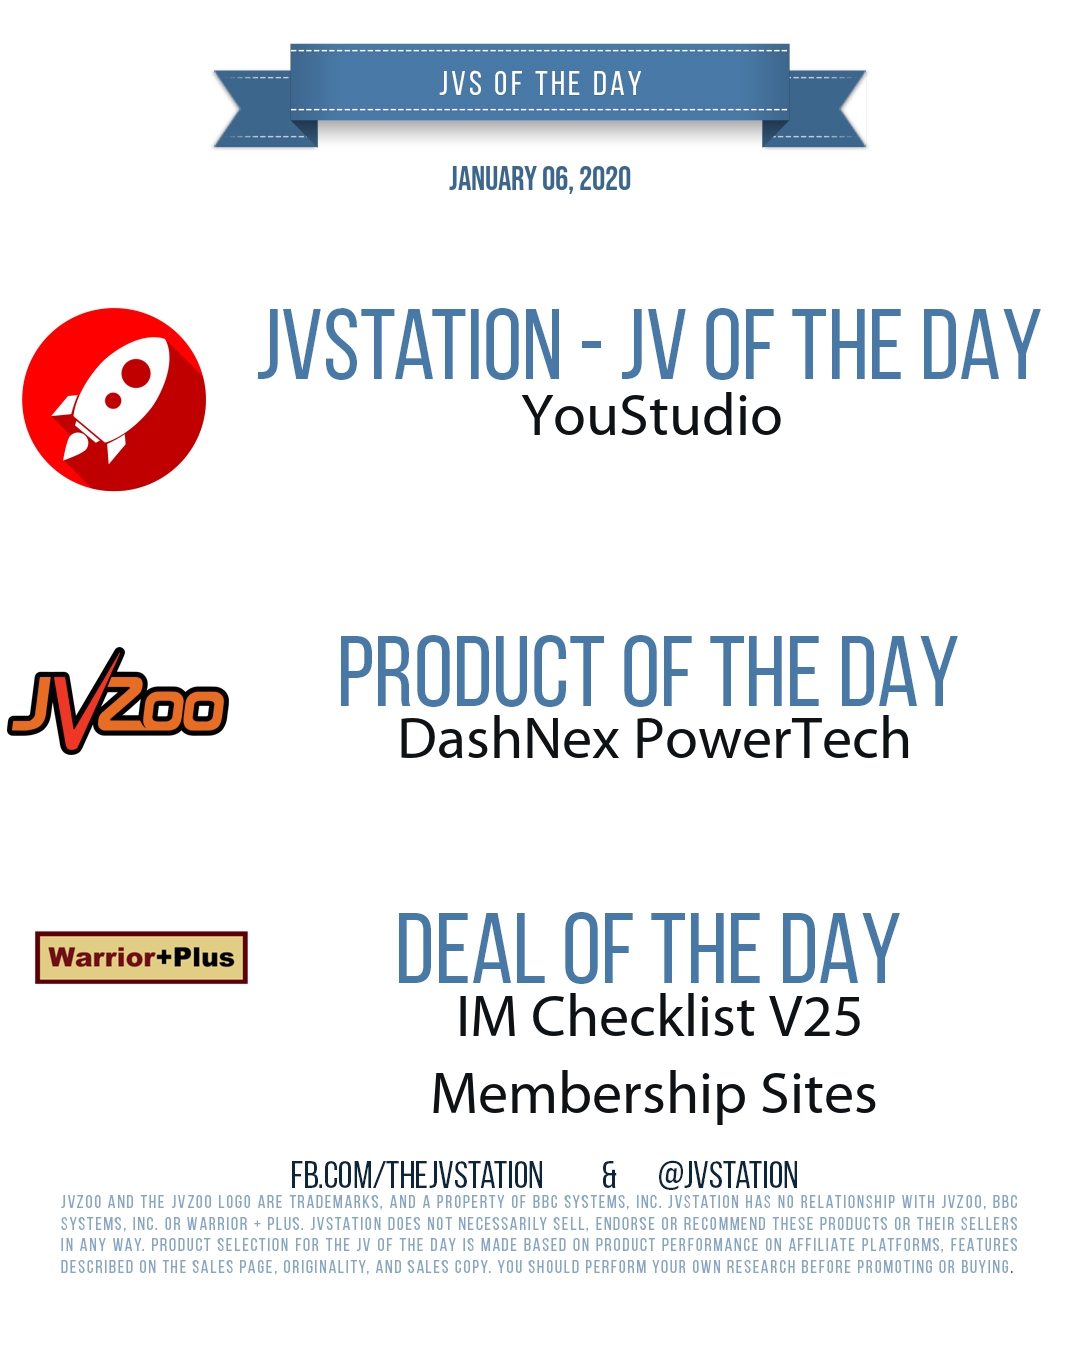 JVs of the day - January 06, 2020